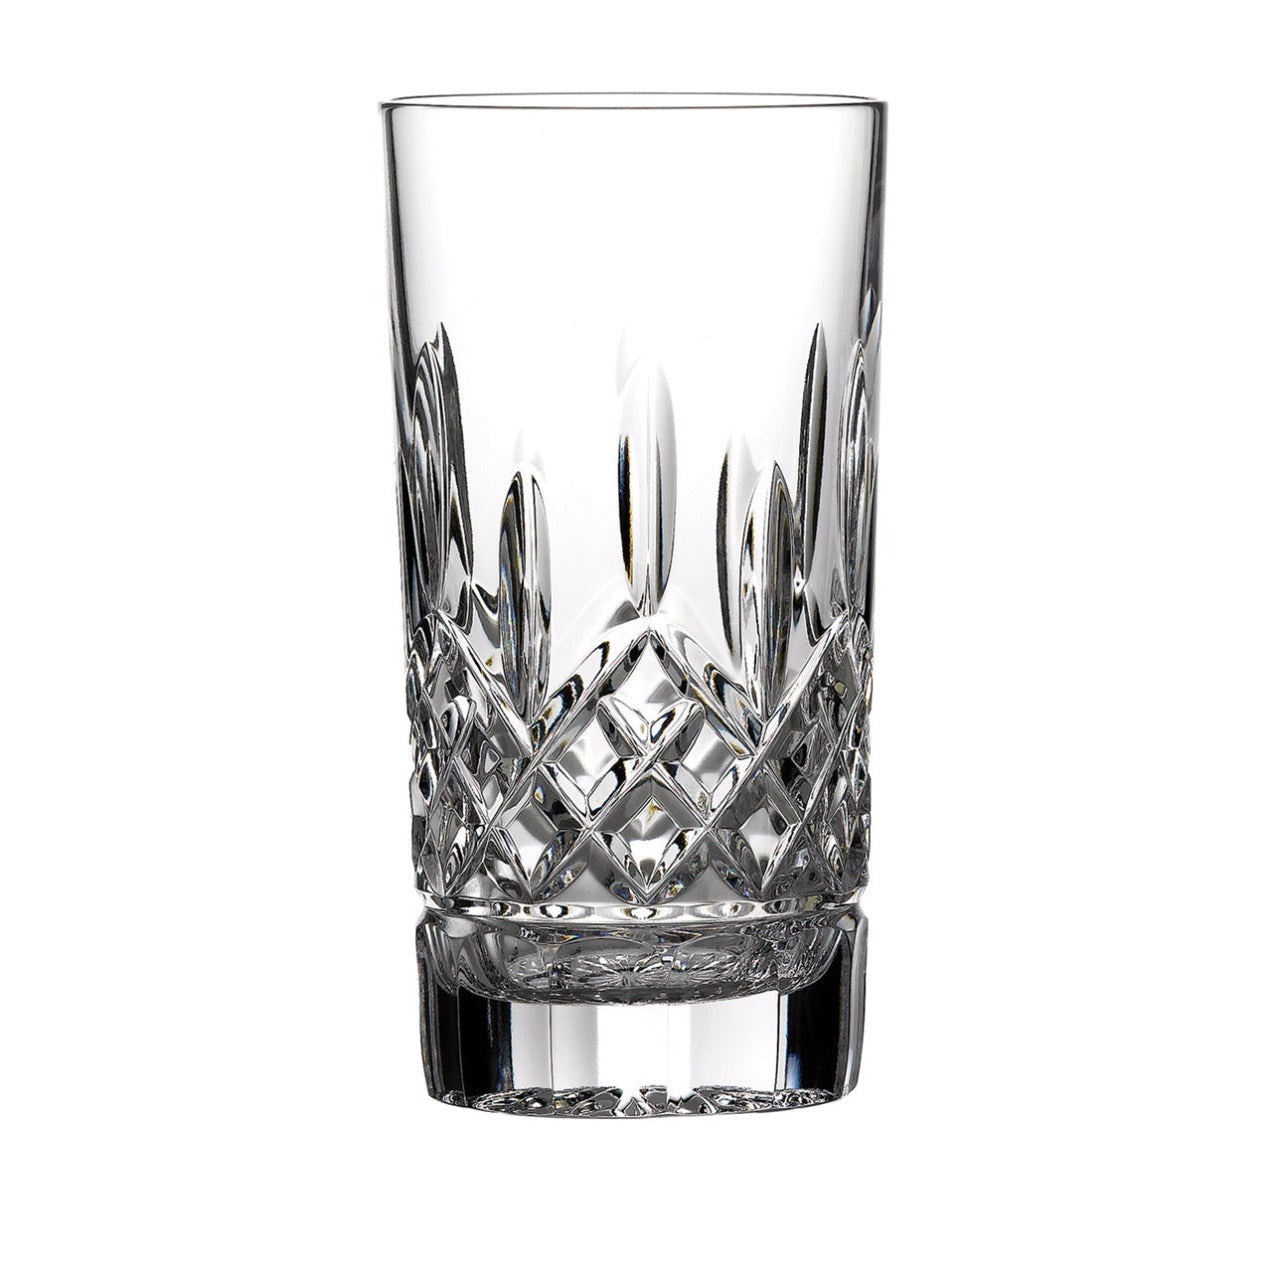 Lismore HiBall Tumbler 12oz by Waterford Crystal  The Waterford Lismore pattern is a stunning combination of brilliance and clarity. The slender design of the Lismore HiBall Tumbler gives ice-cubes a musical note when they hit the sides. Ideal for serving long, cool cocktails and mixed drinks, the dramatic diamond and wedge cuts of the traditional Lismore pattern refract light with stunning radiance.